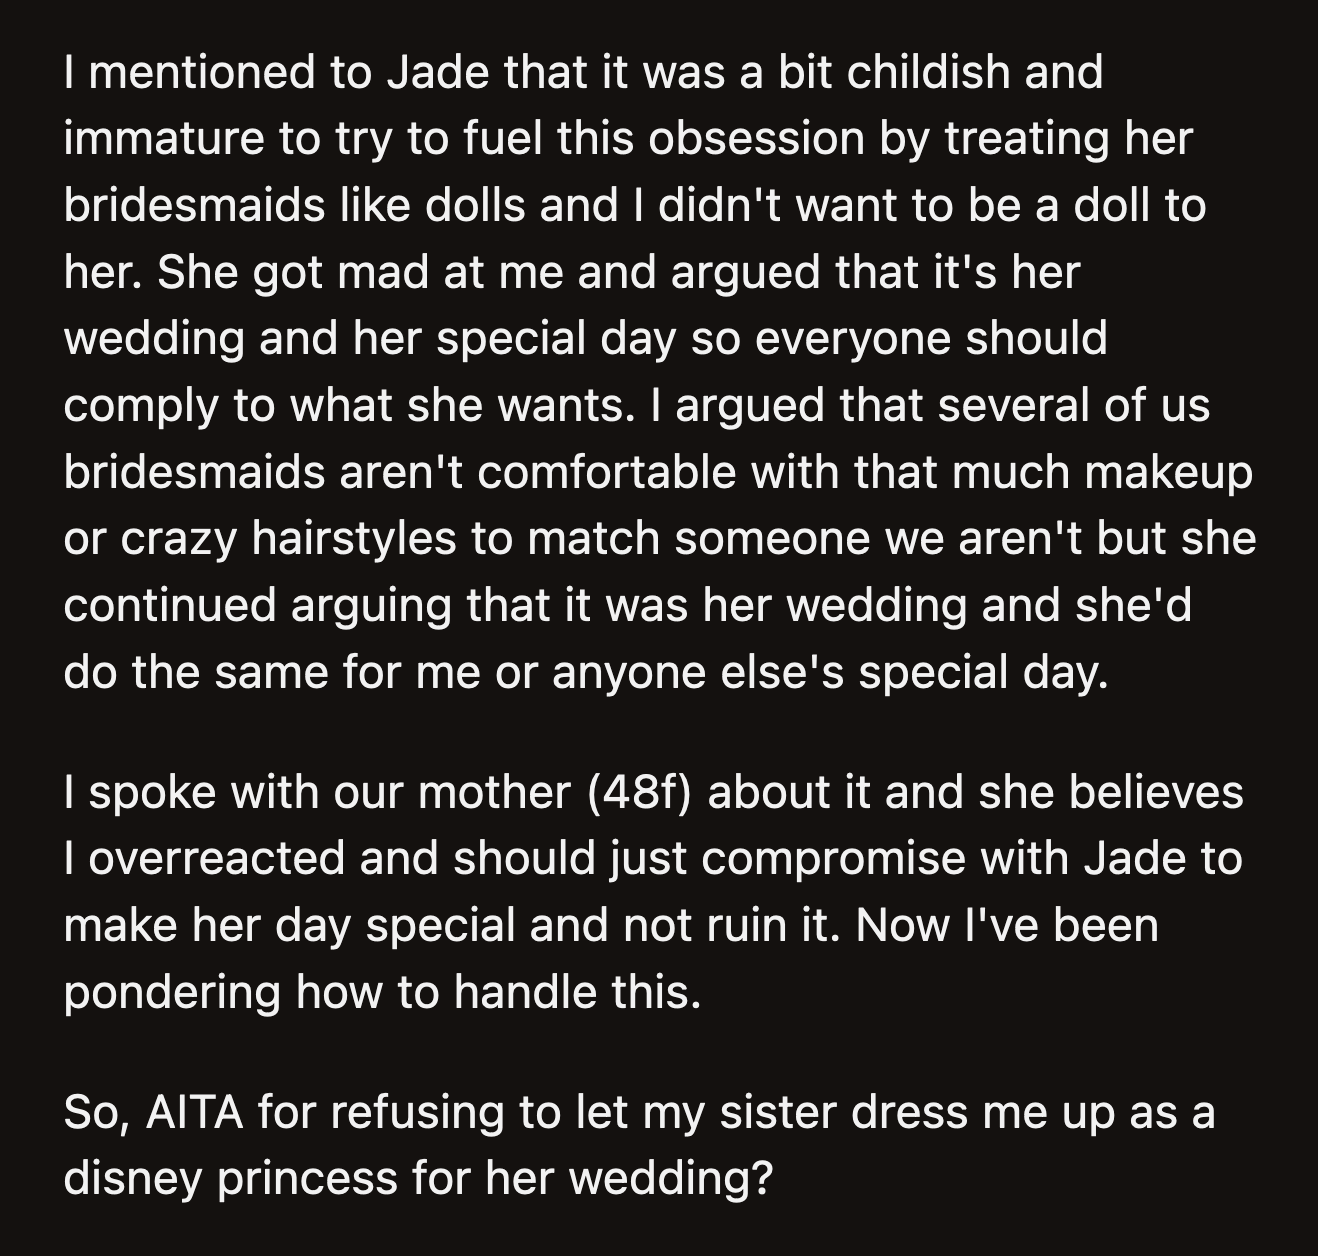 Their mom said OP overreacted and advised her to find a compromise with Jade. OP has been torn with indecision since that conversation.